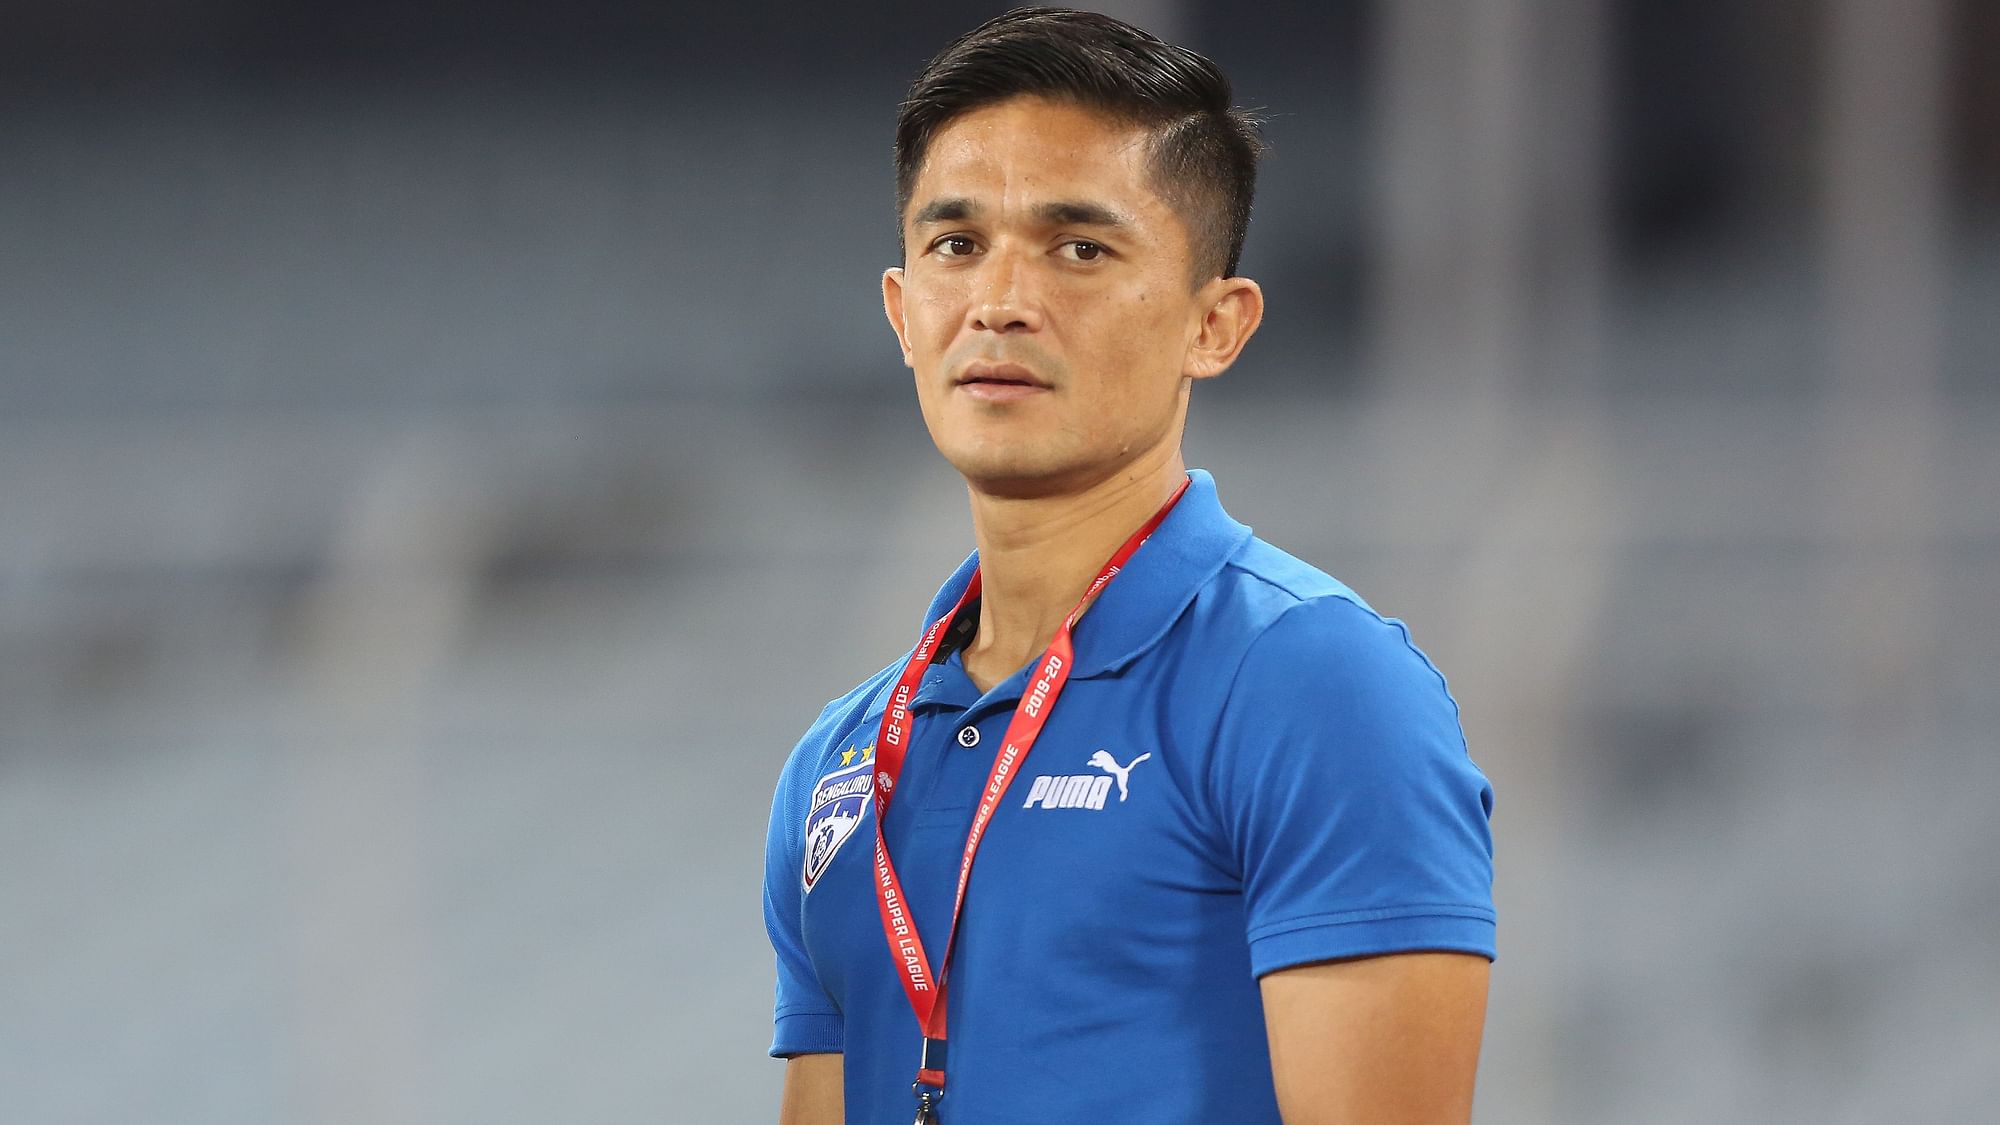 Sunil Chhetri has sought justice for the bereaved family of shopkeeper P. Jeyaraj and his son J. Bennicks, saying what happened with the father-son duo in Tamil Nadu is “beyond acceptable”.